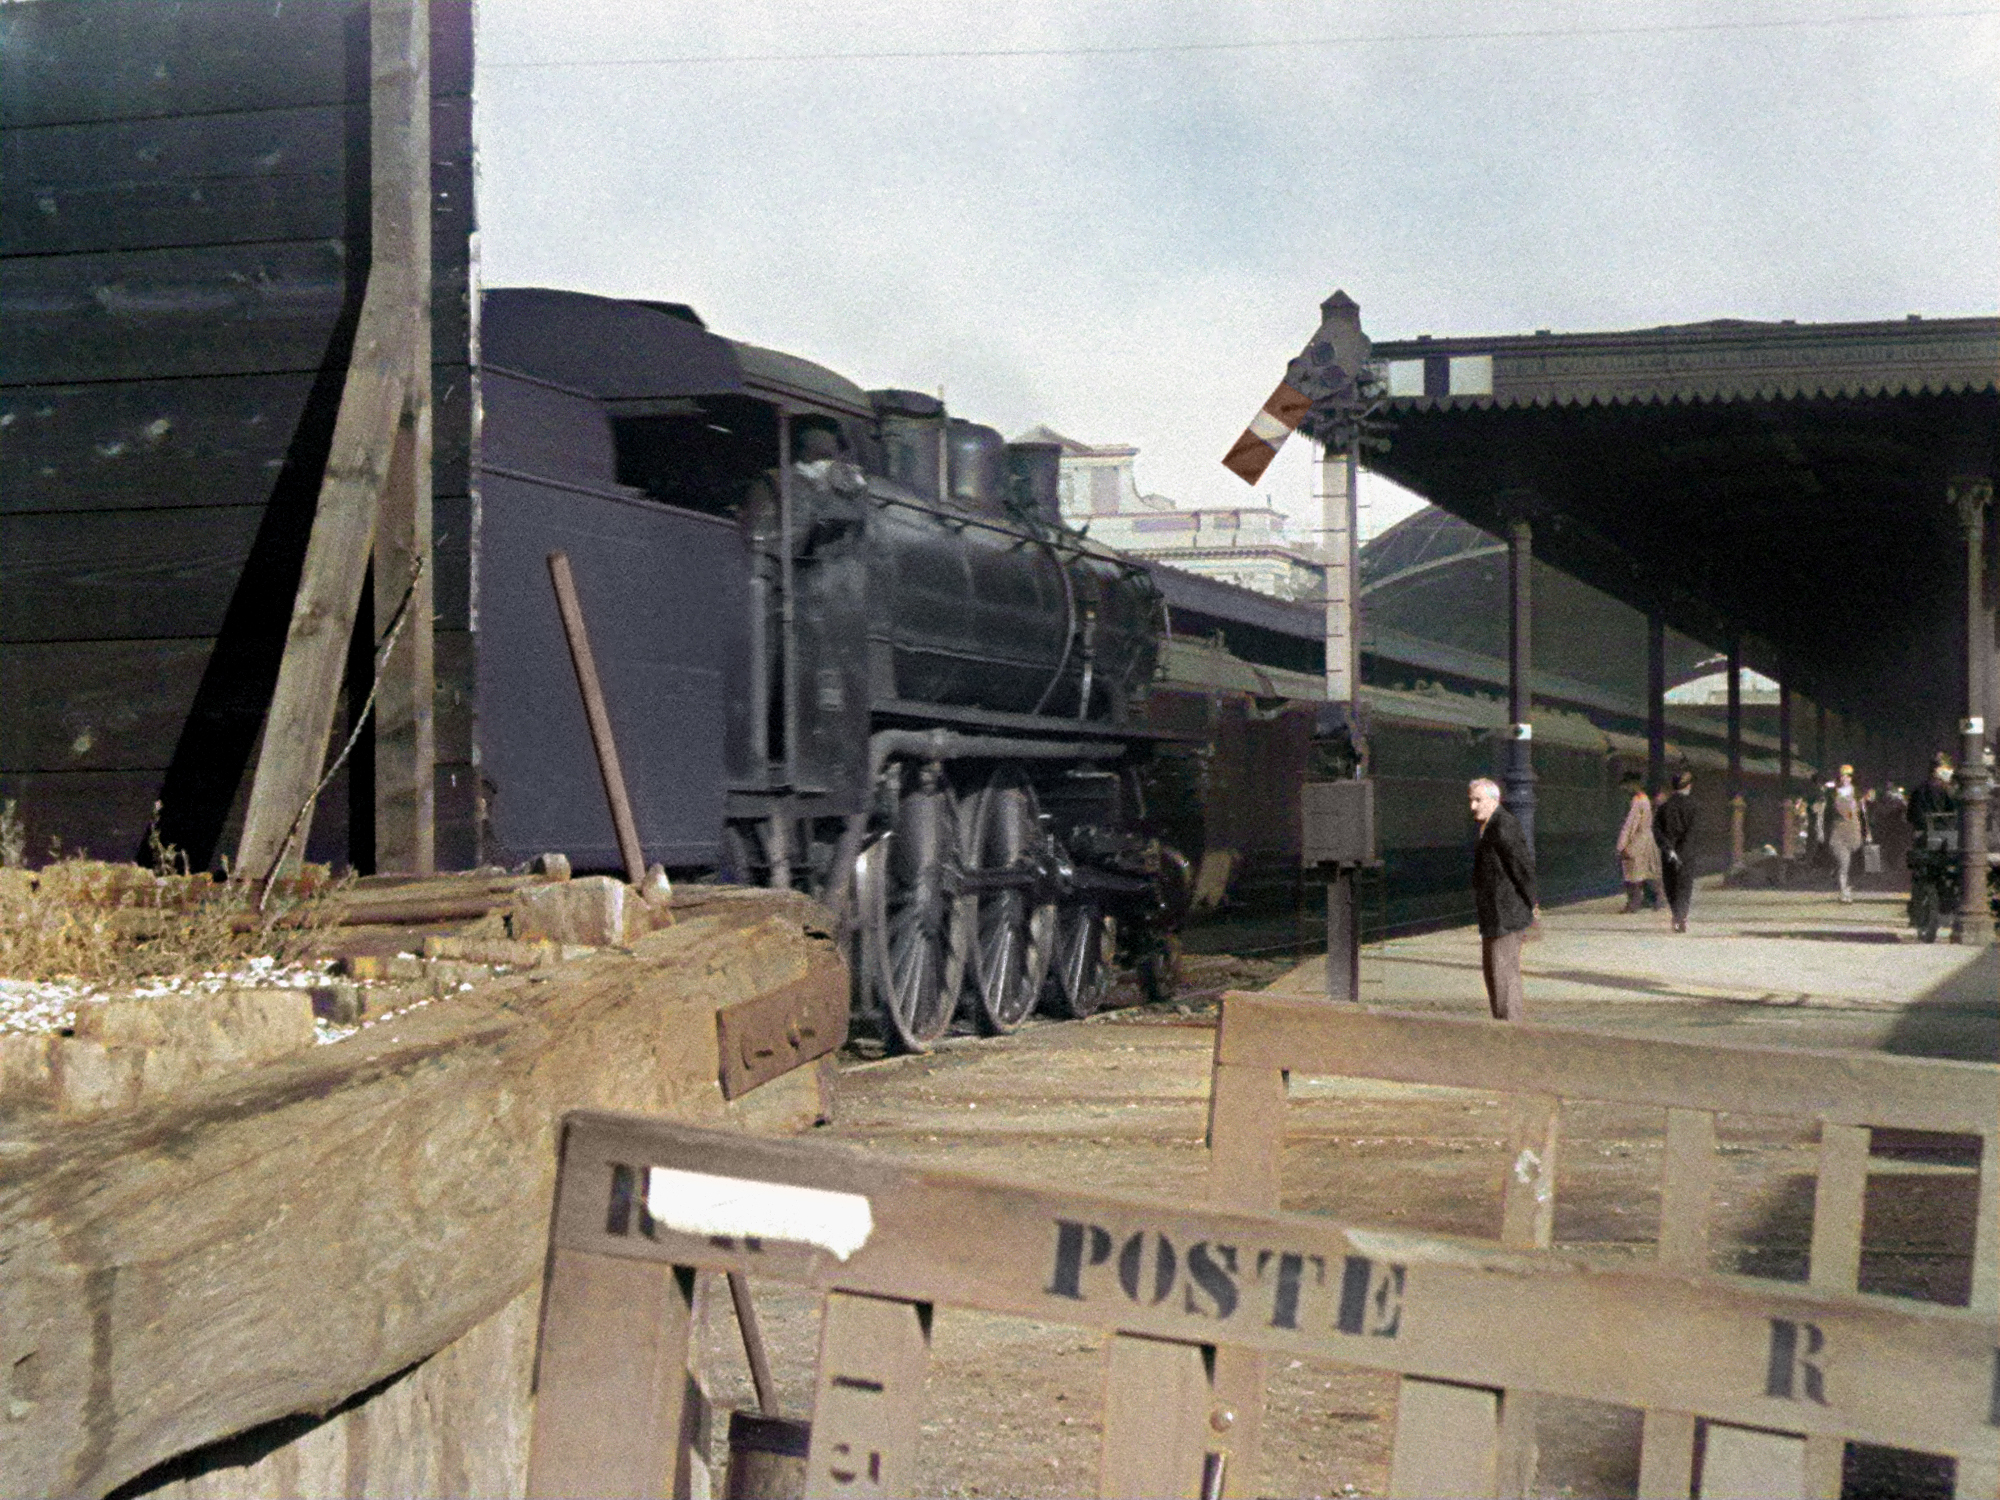 Rhythms of Station, a restoration and colorization project by HTM's Oz Color colorization method